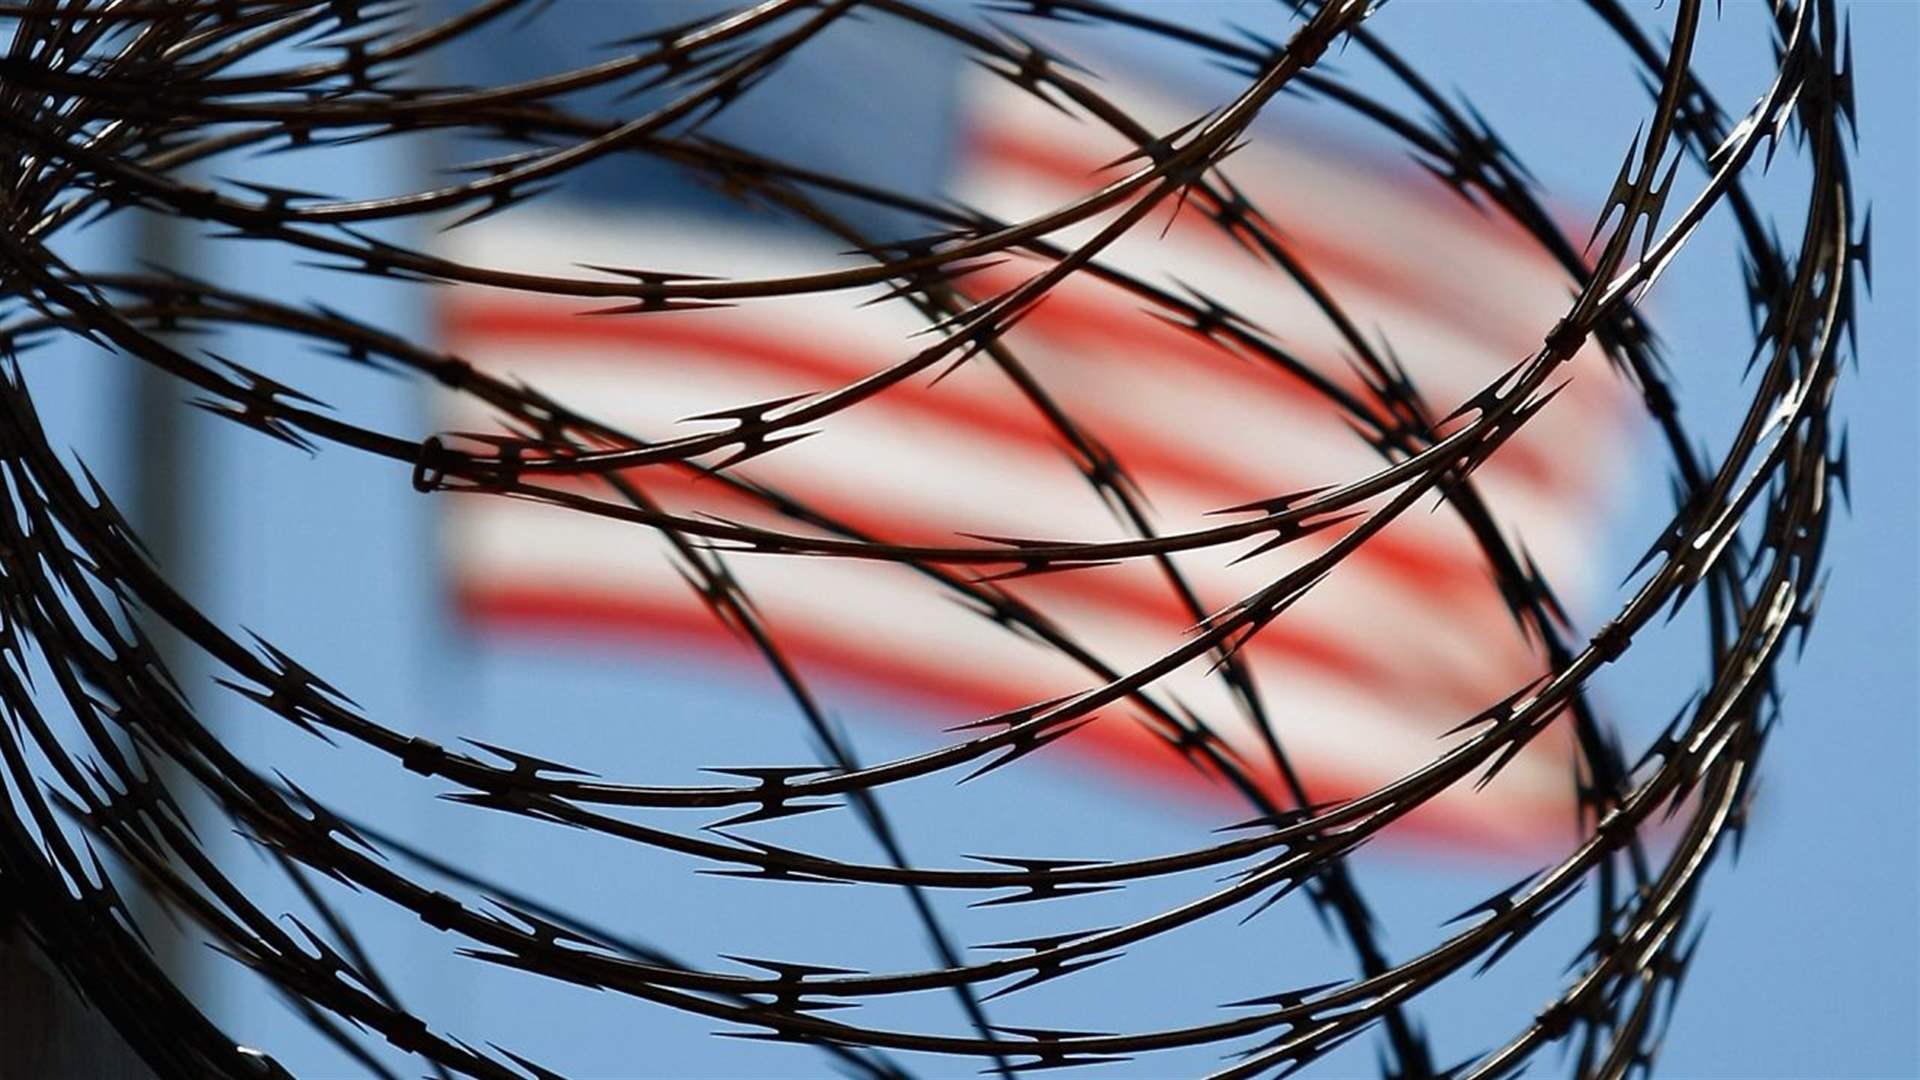 Three Sept. 11 suspects decide to plead guilty at Guantanamo